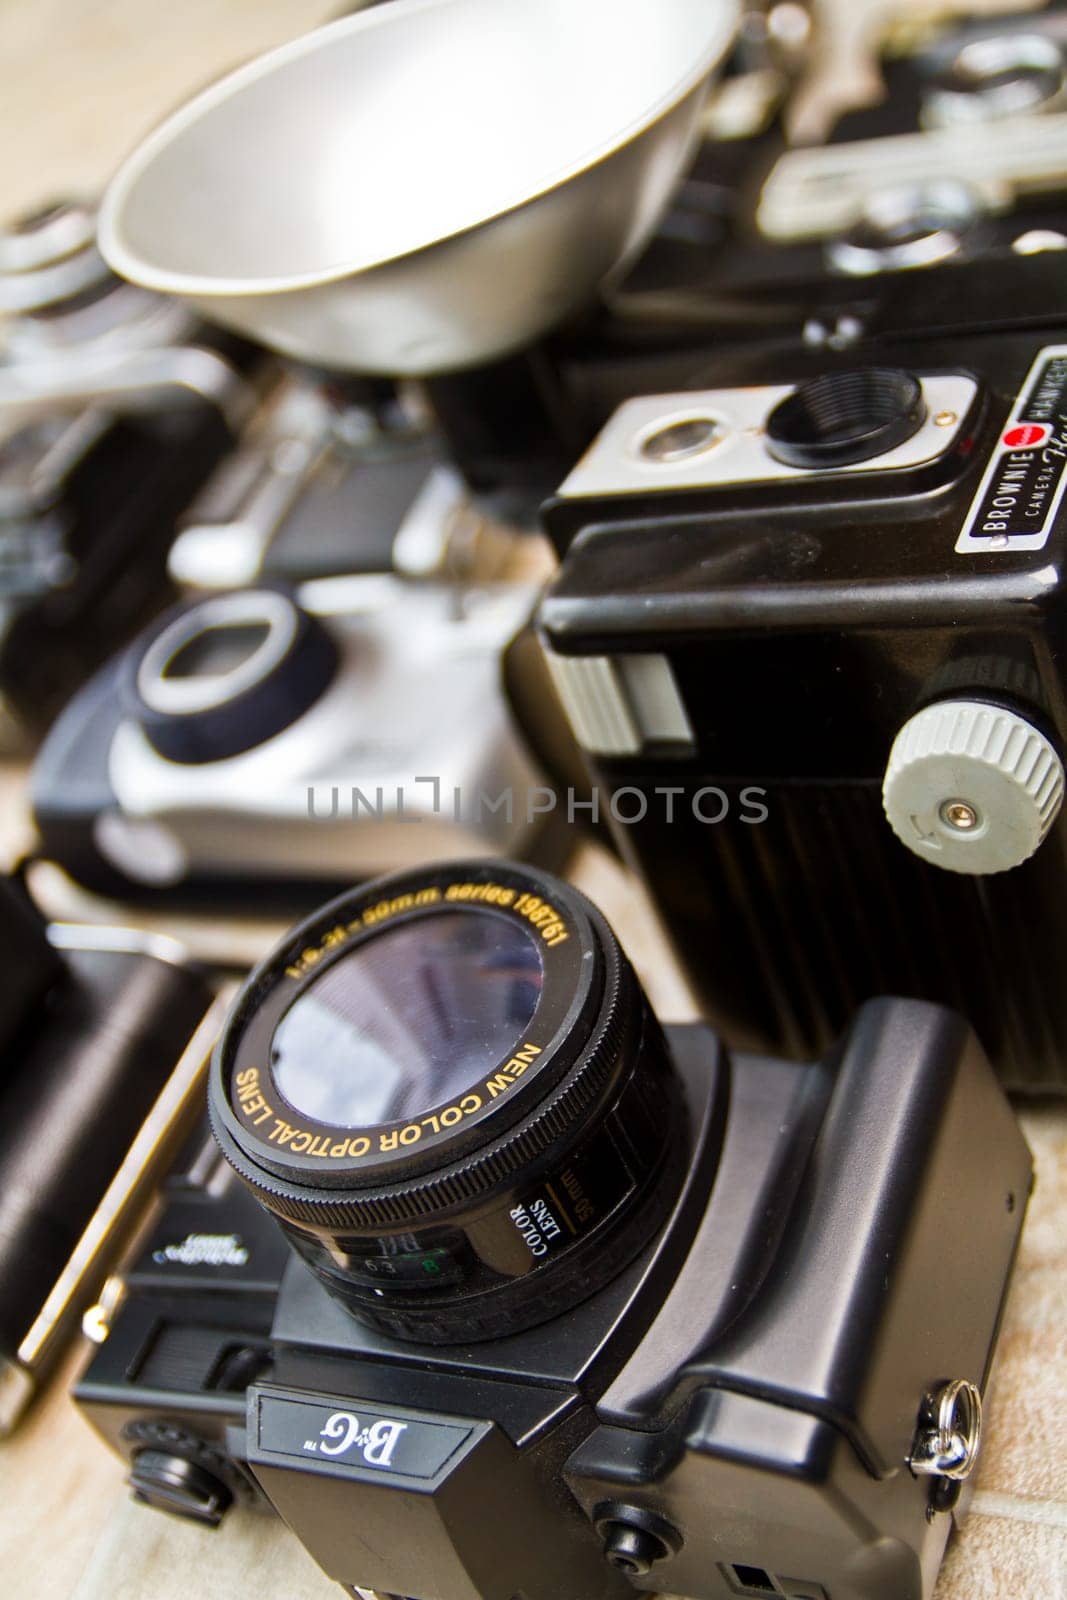 Vintage 35mm SLR Camera with Auto Optic Lens and Photography Equipment on Textured Surface - Nostalgia, History of Photography, Vintage Technology